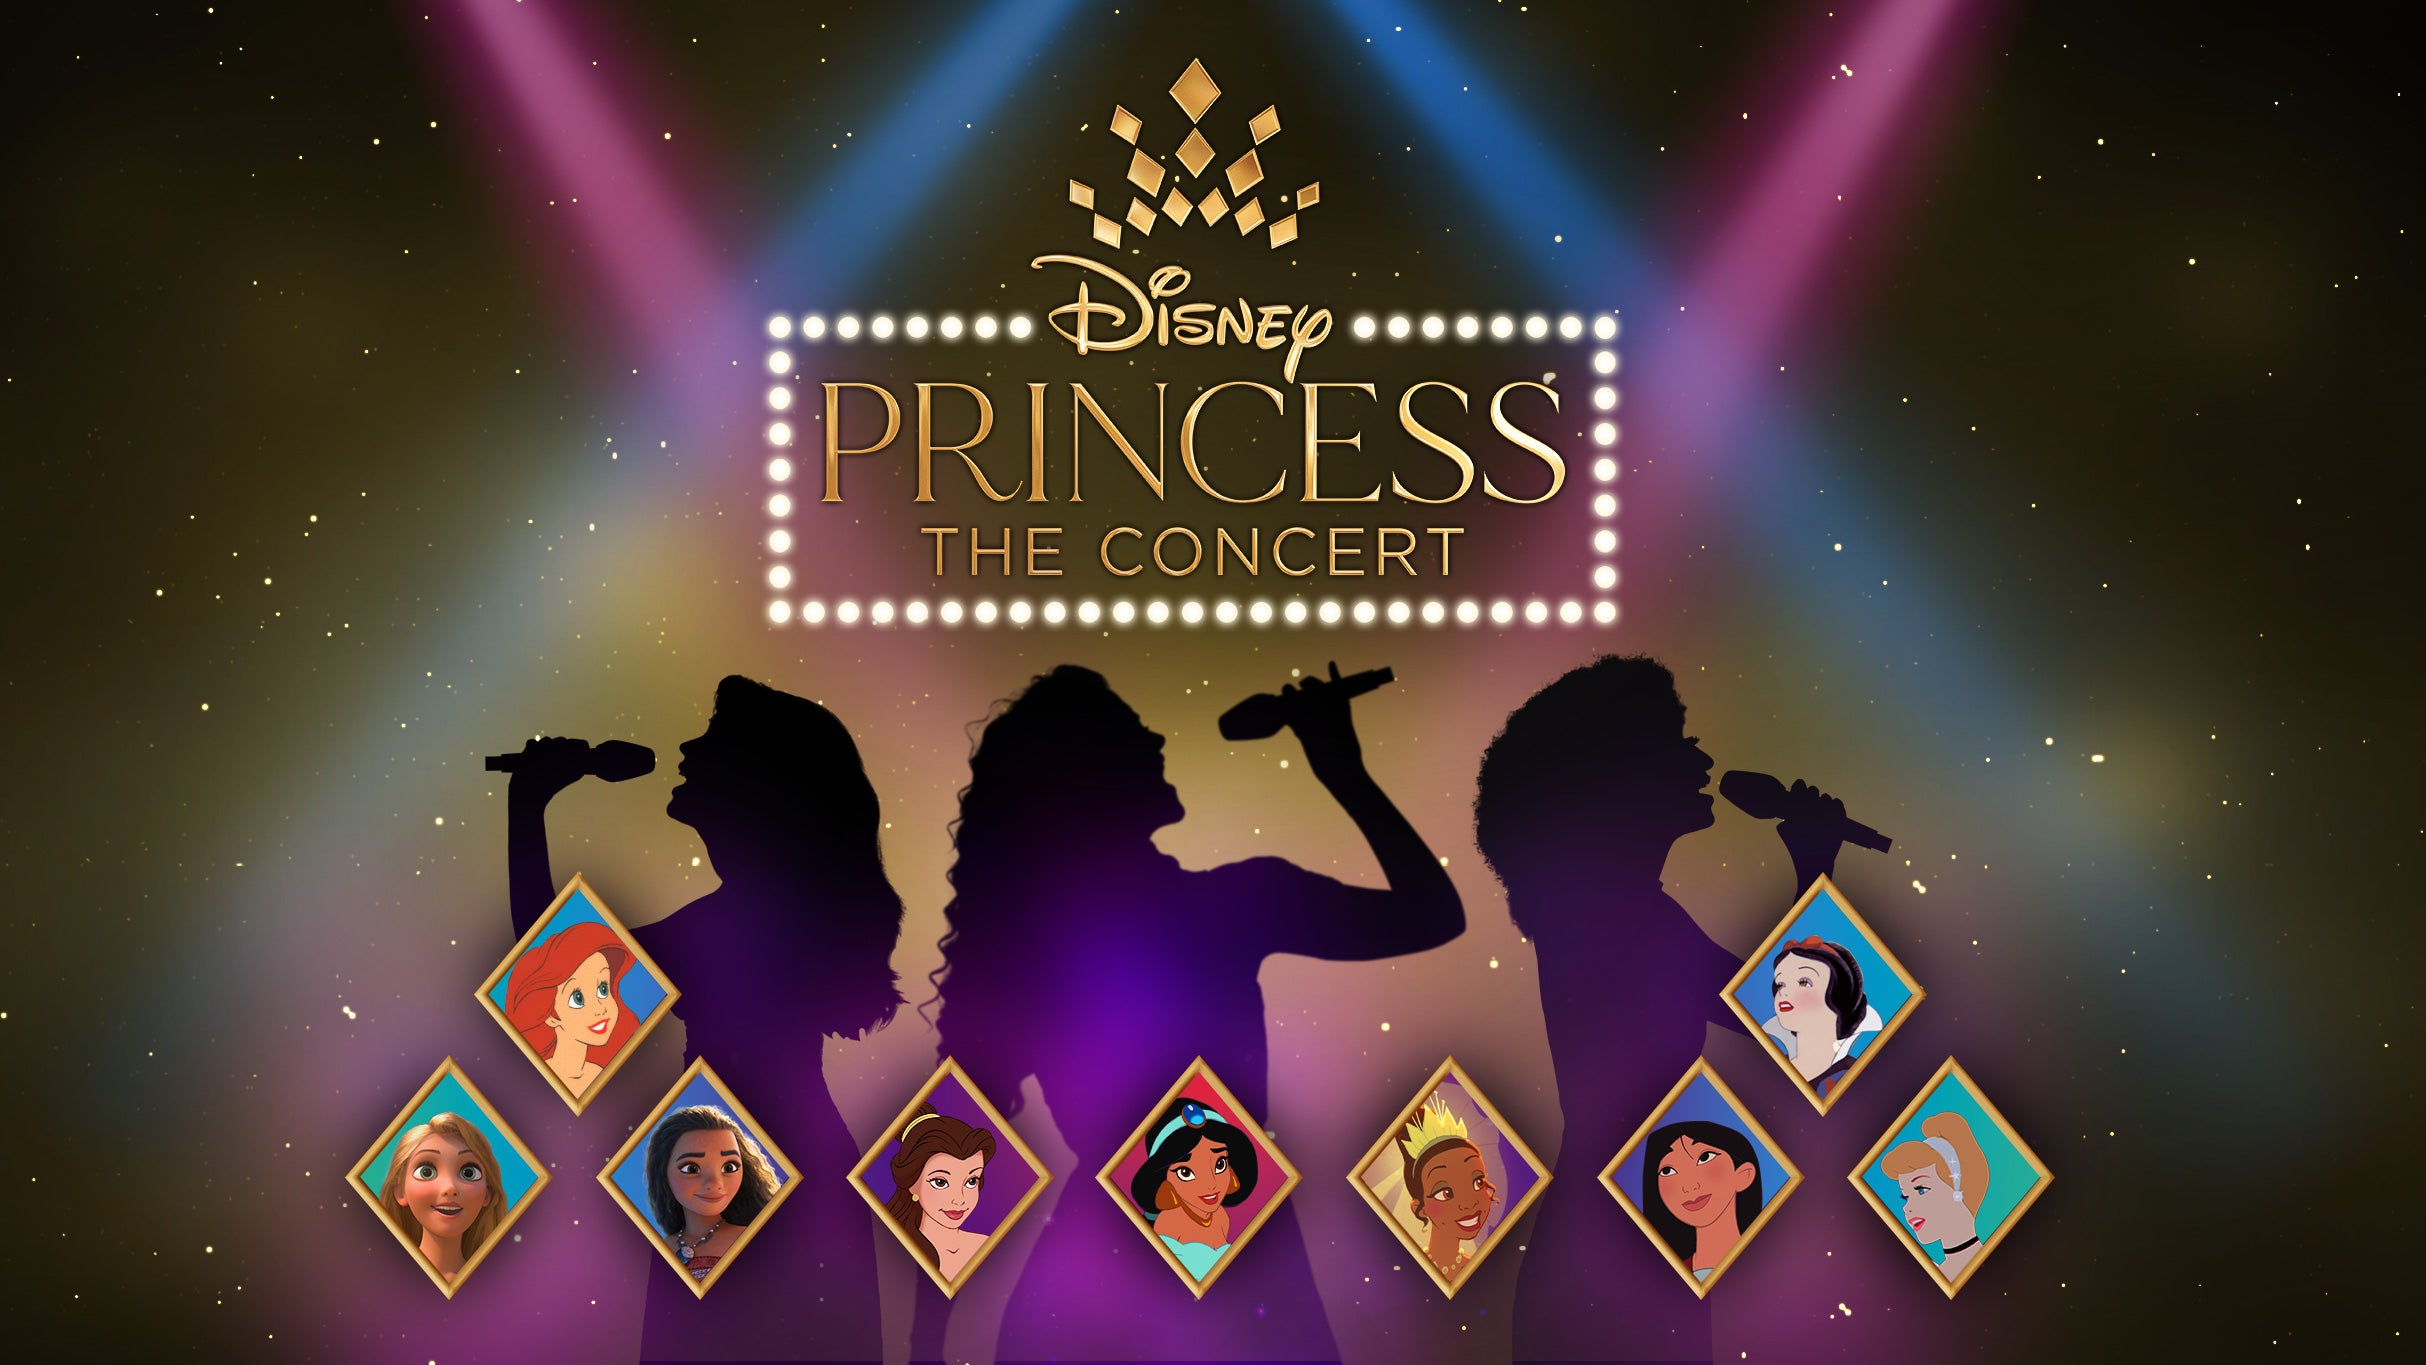 Disney Princess: The Concert free presale password for early tickets in Fort Wayne